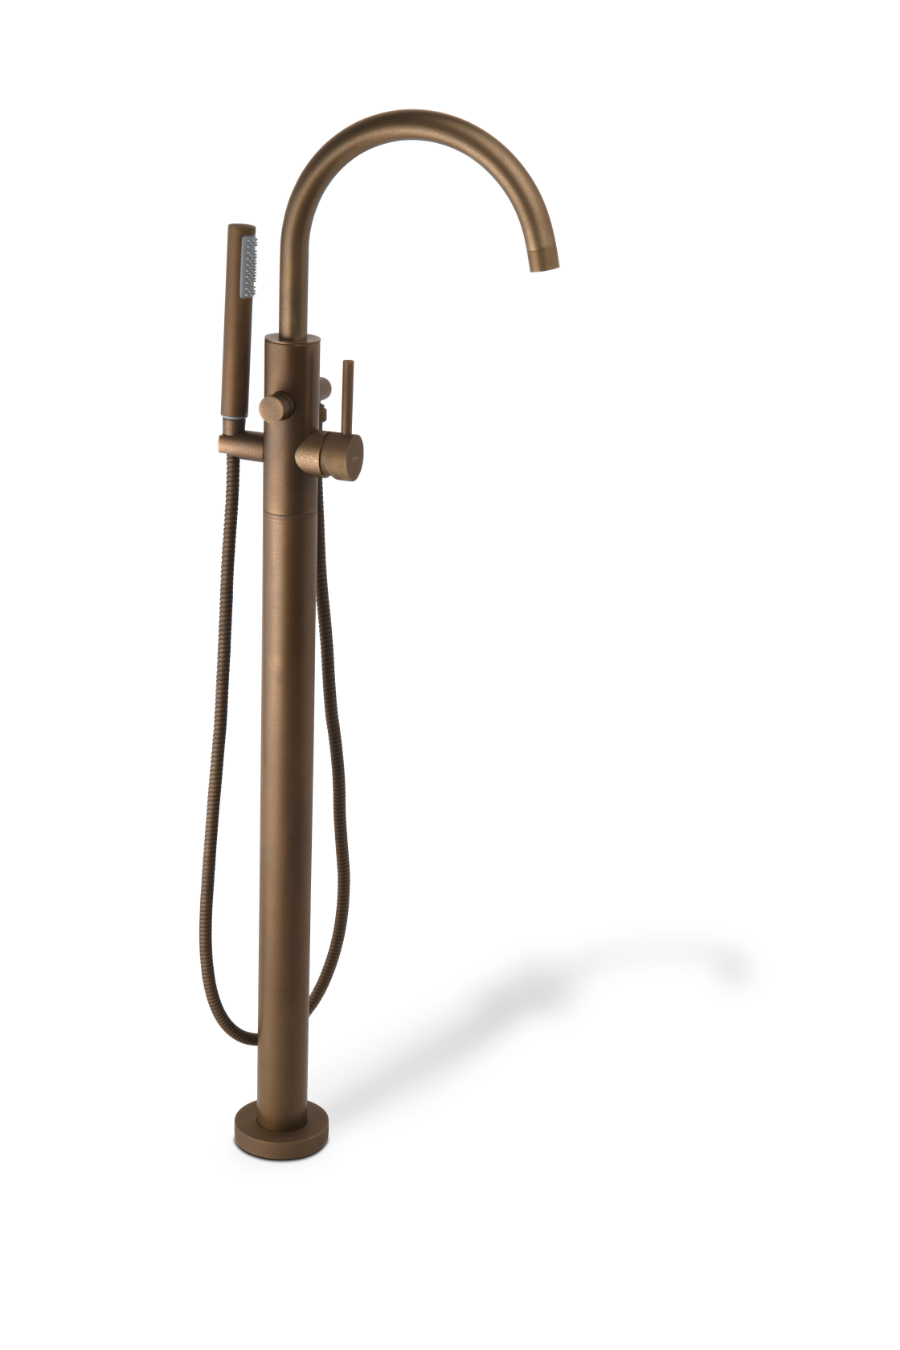 Pulse Mounting Floor Mixer With Hand Shower Tap Product Bathtub